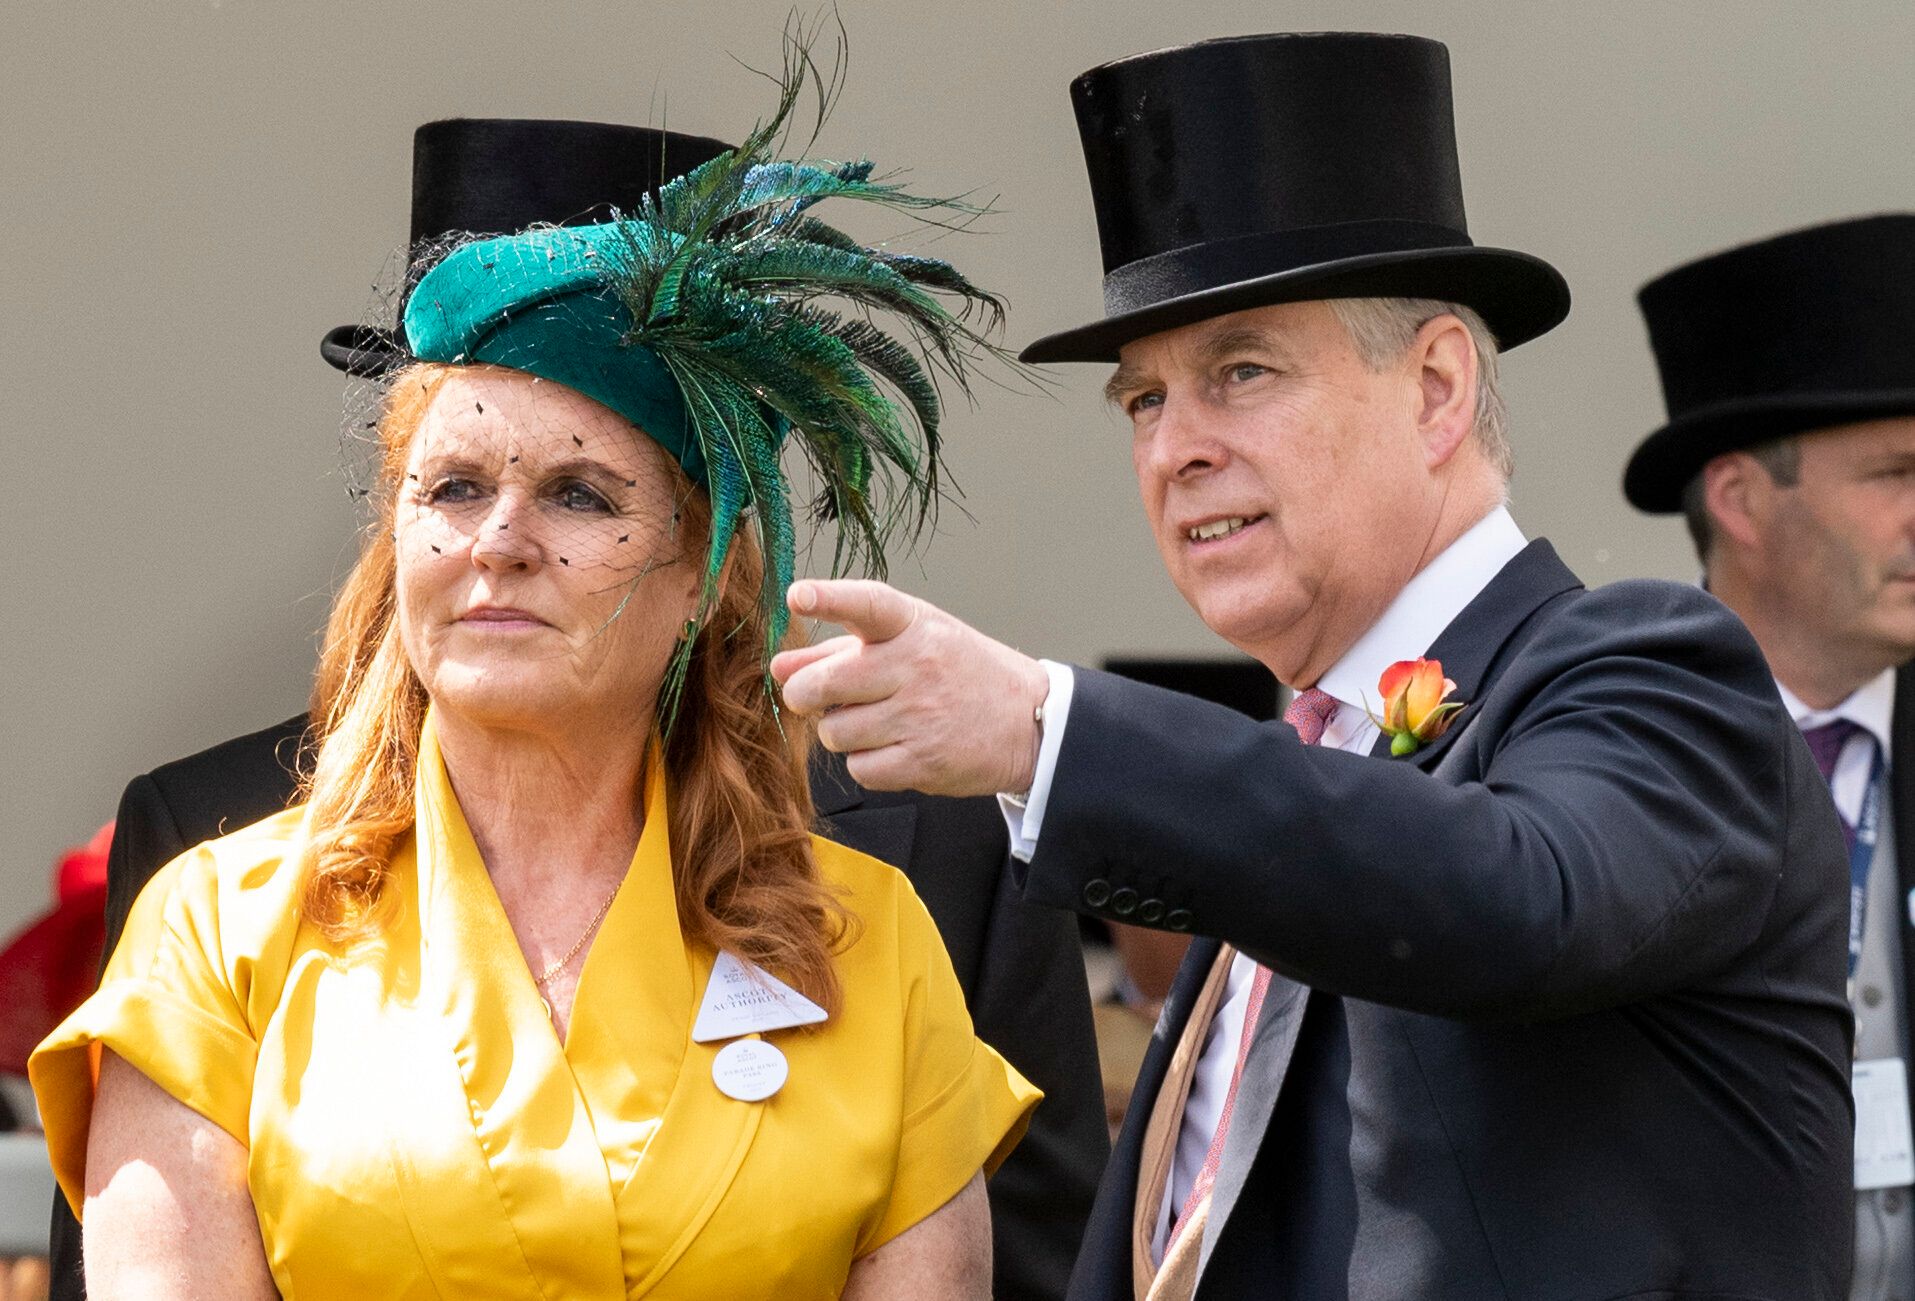 Prince Andrew and Sarah Ferguson during the Royal Ascot in 2019.